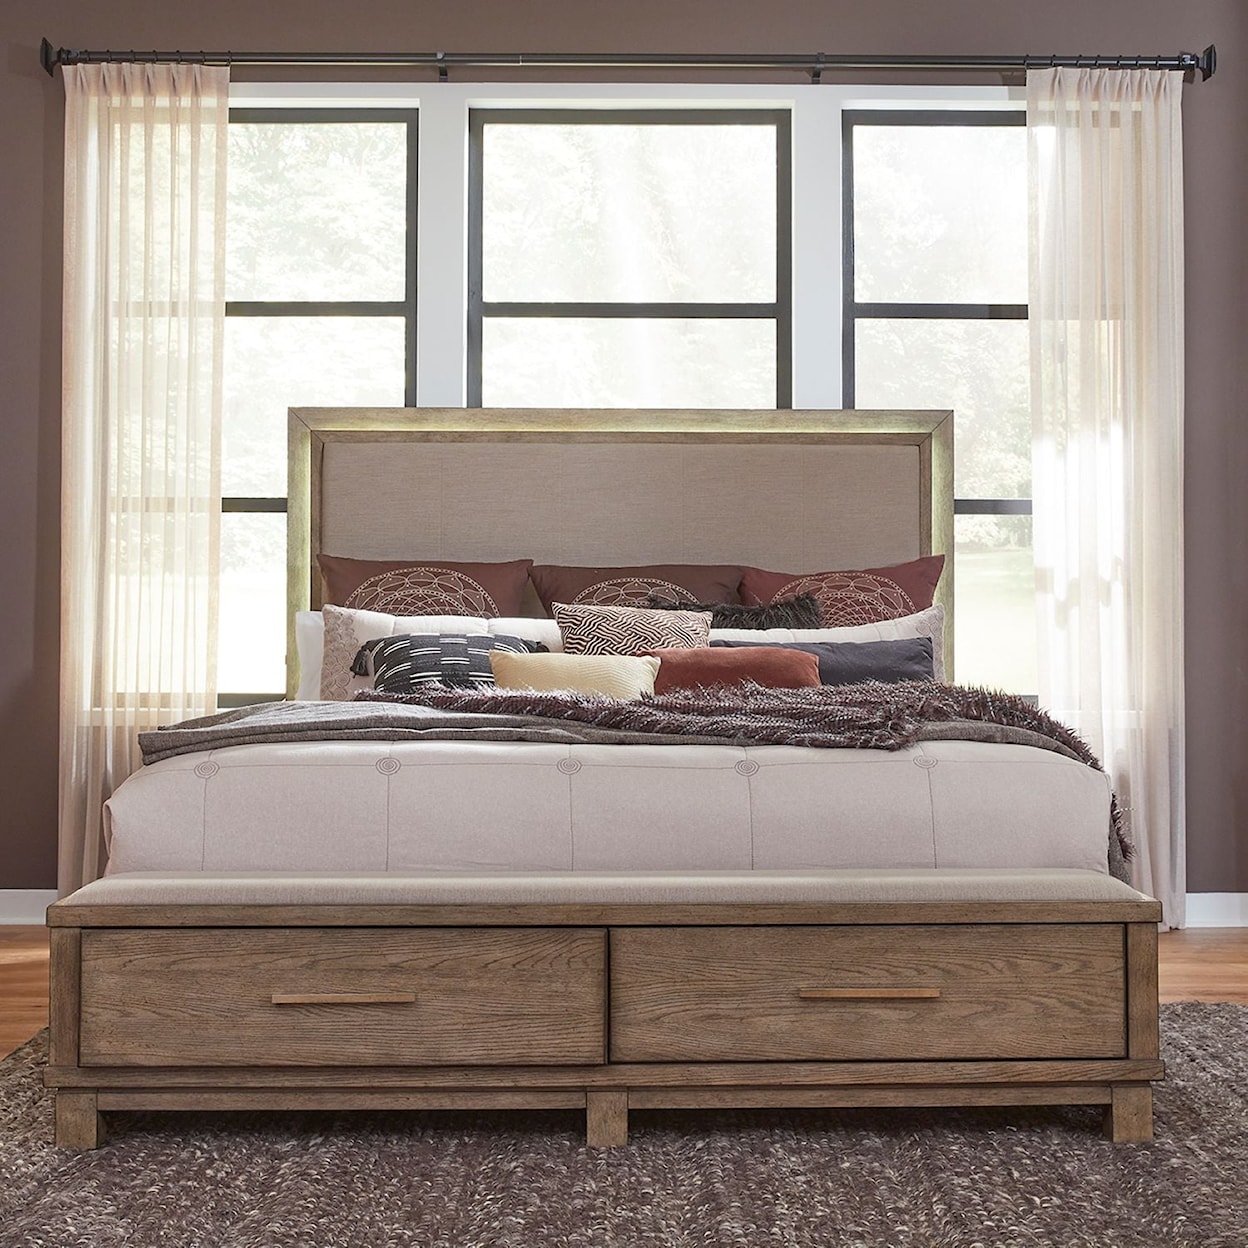 Libby Canyon Road Queen Bedroom Set